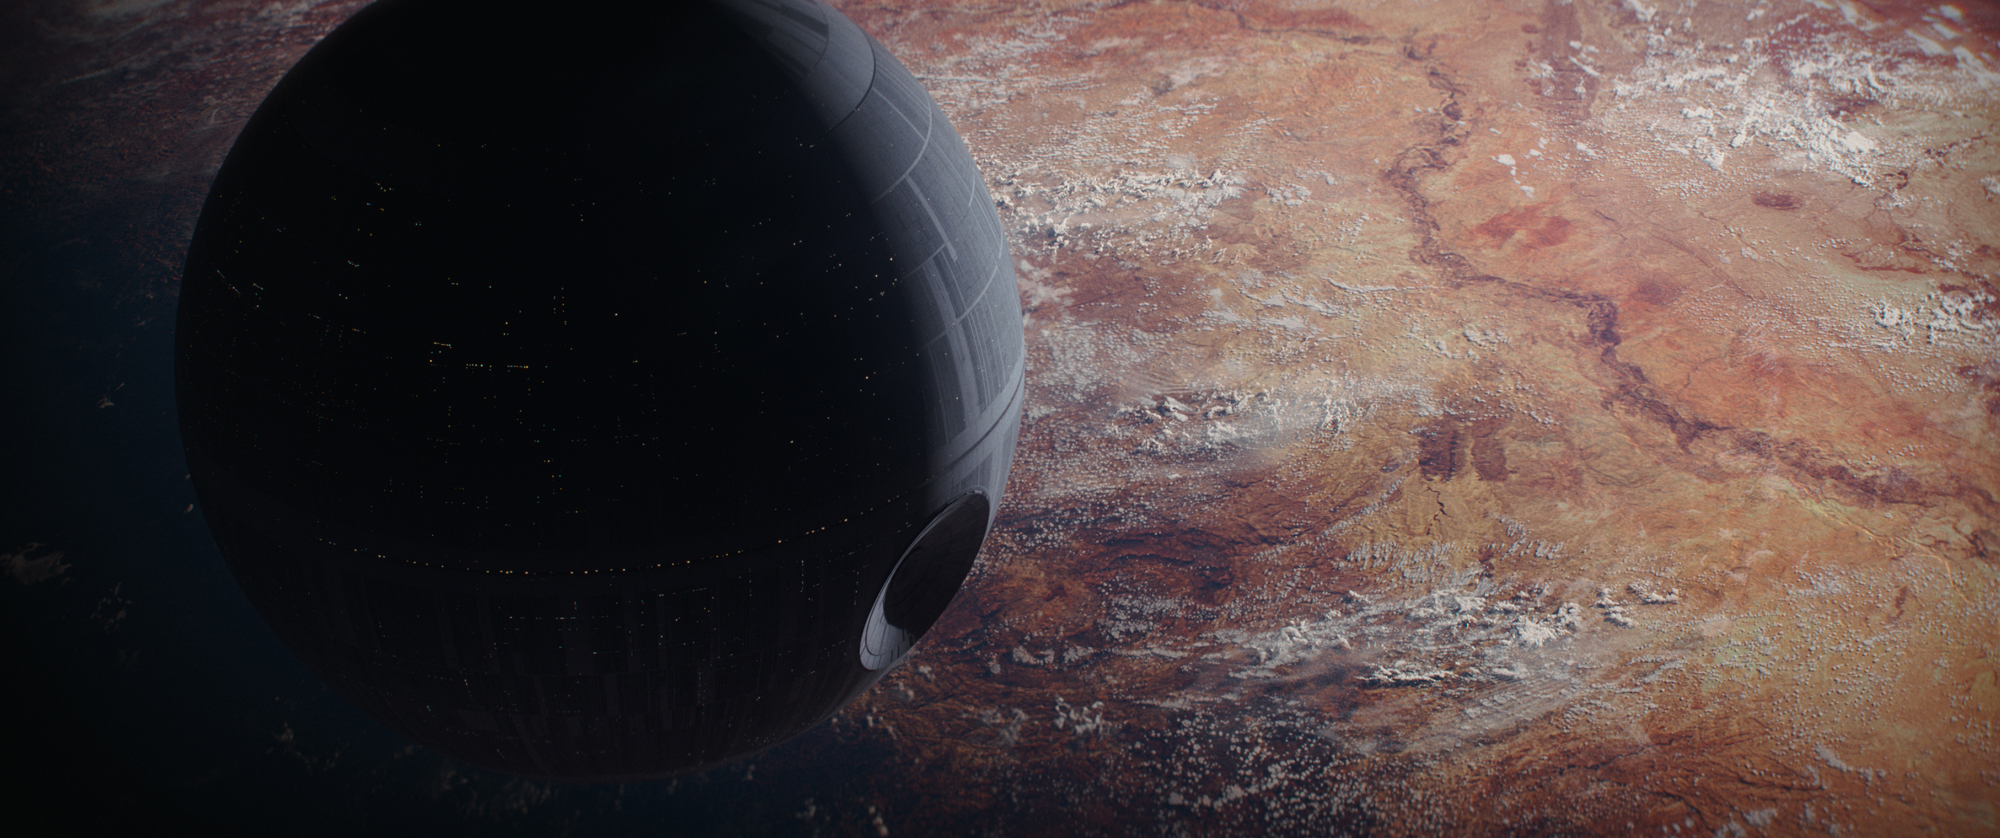 http://www.space.com/images/i/000/060/822/original/death-star-rogue-one.jpg?interpolation=lanczos-none&fit=inside%7C660:*